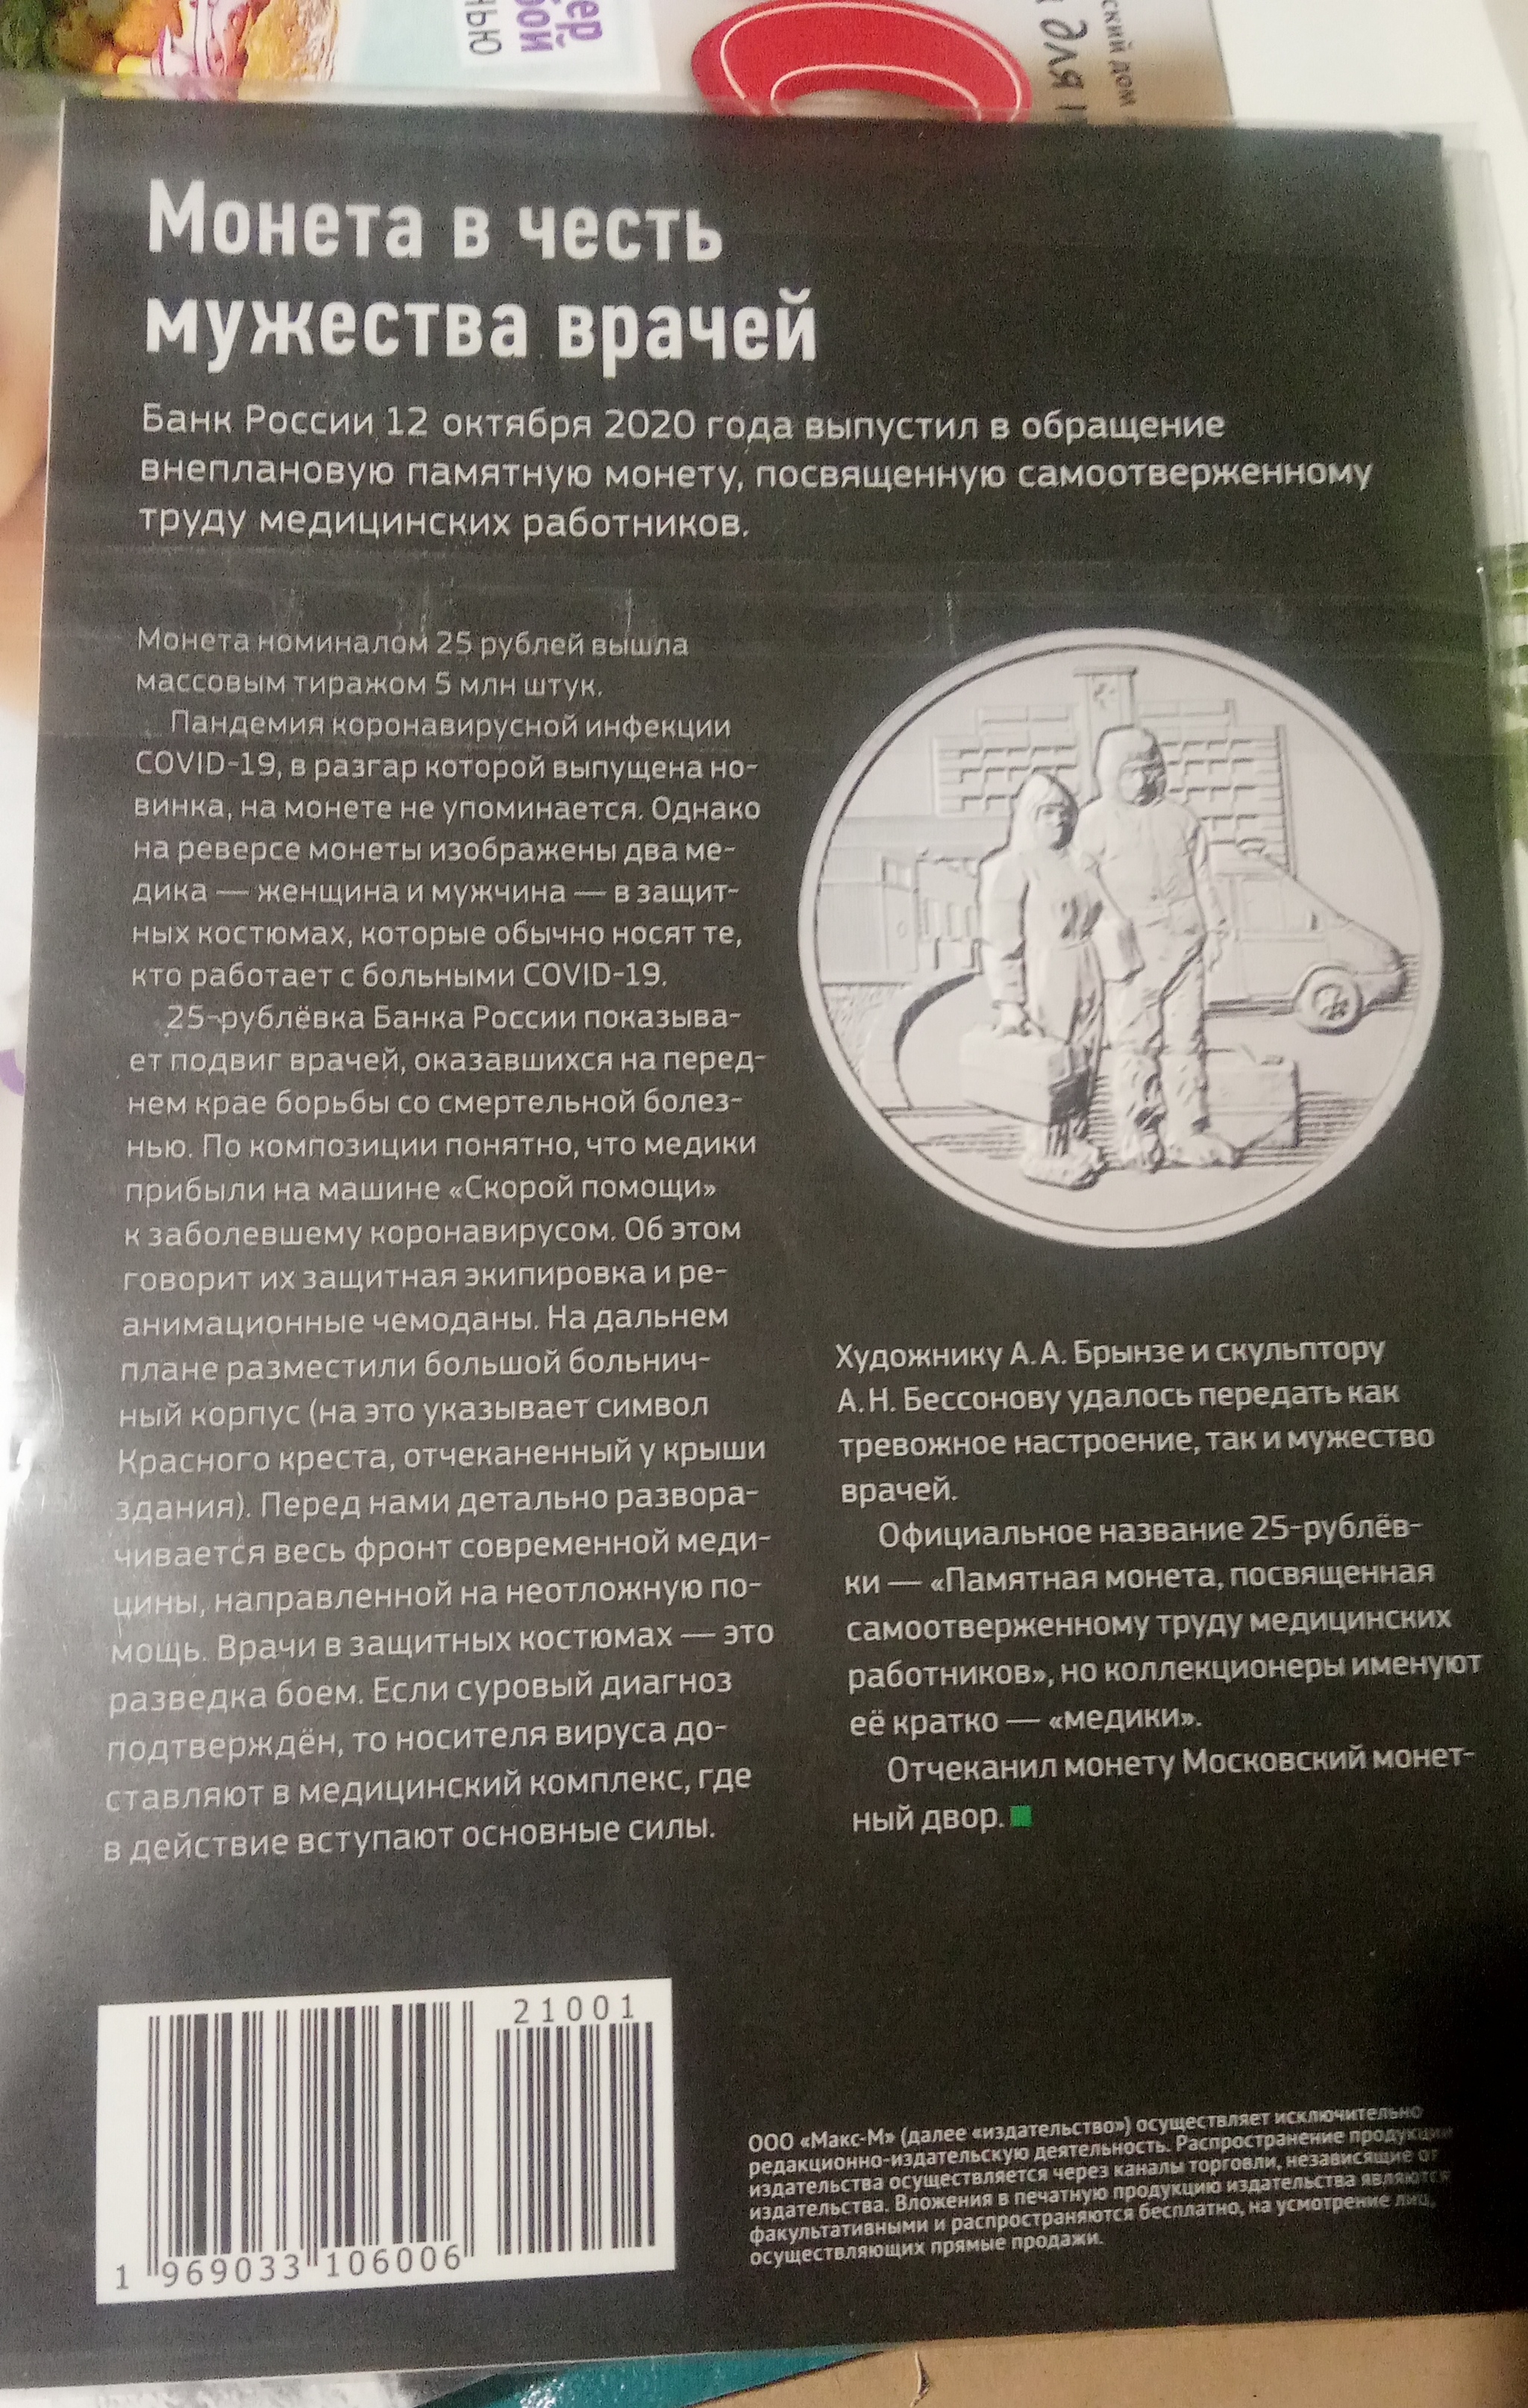 Response to the post “The Bank of Russia decided to issue a commemorative coin dedicated to medical workers” - Money, Coin, Numismatics, Bank, Doctors, Magazine, Longpost